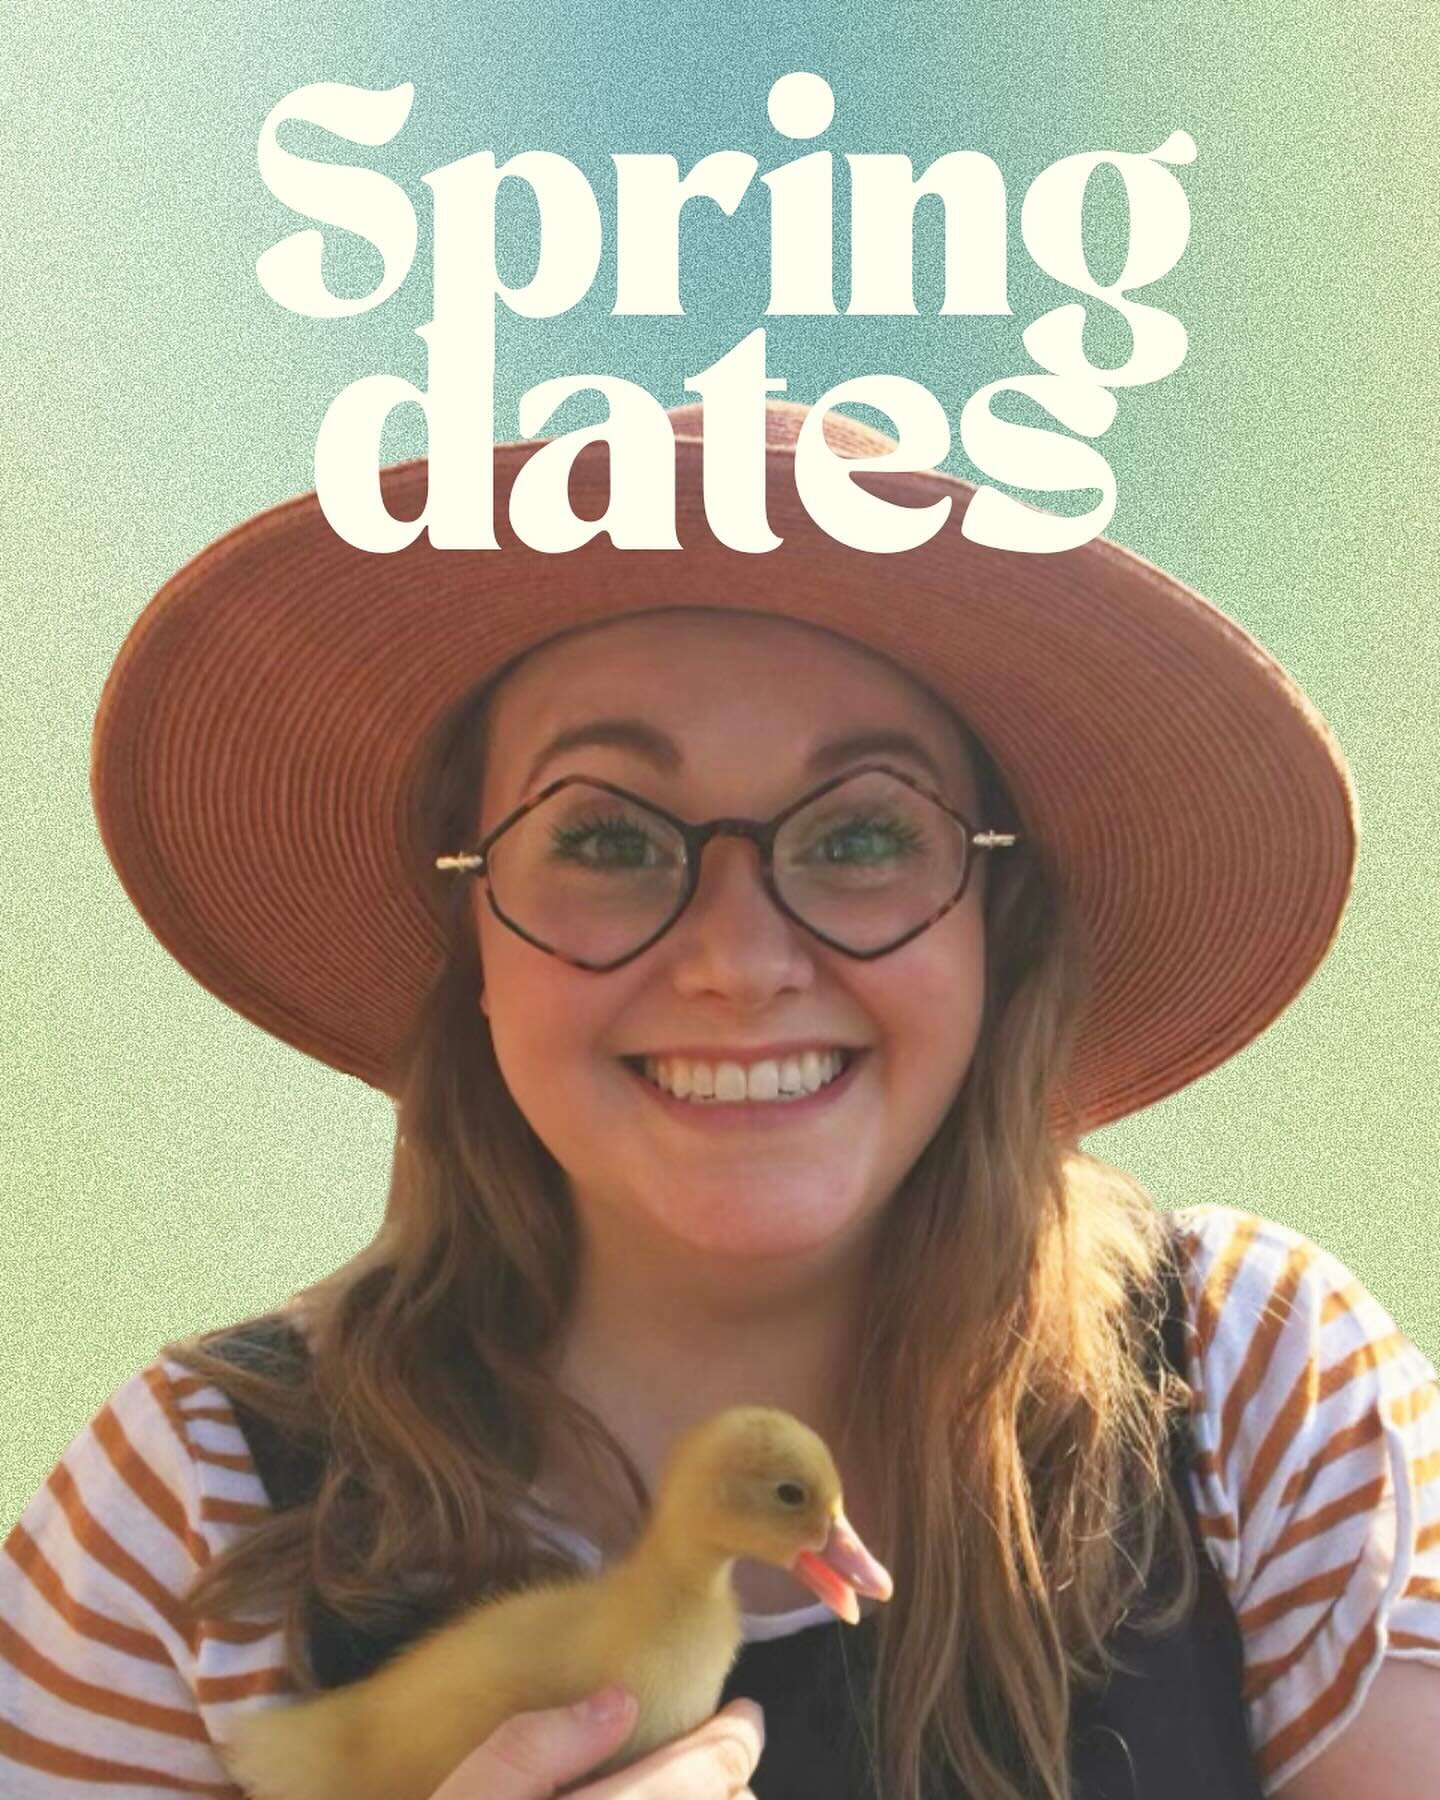 Hey! Spring is SPRINGING so here is a picture of me being ridiculously happy about holding a baby chick to let you know all the art markets I have lined up for this glorious season of growth! I hope to see your lovely face soon! I have so much new an